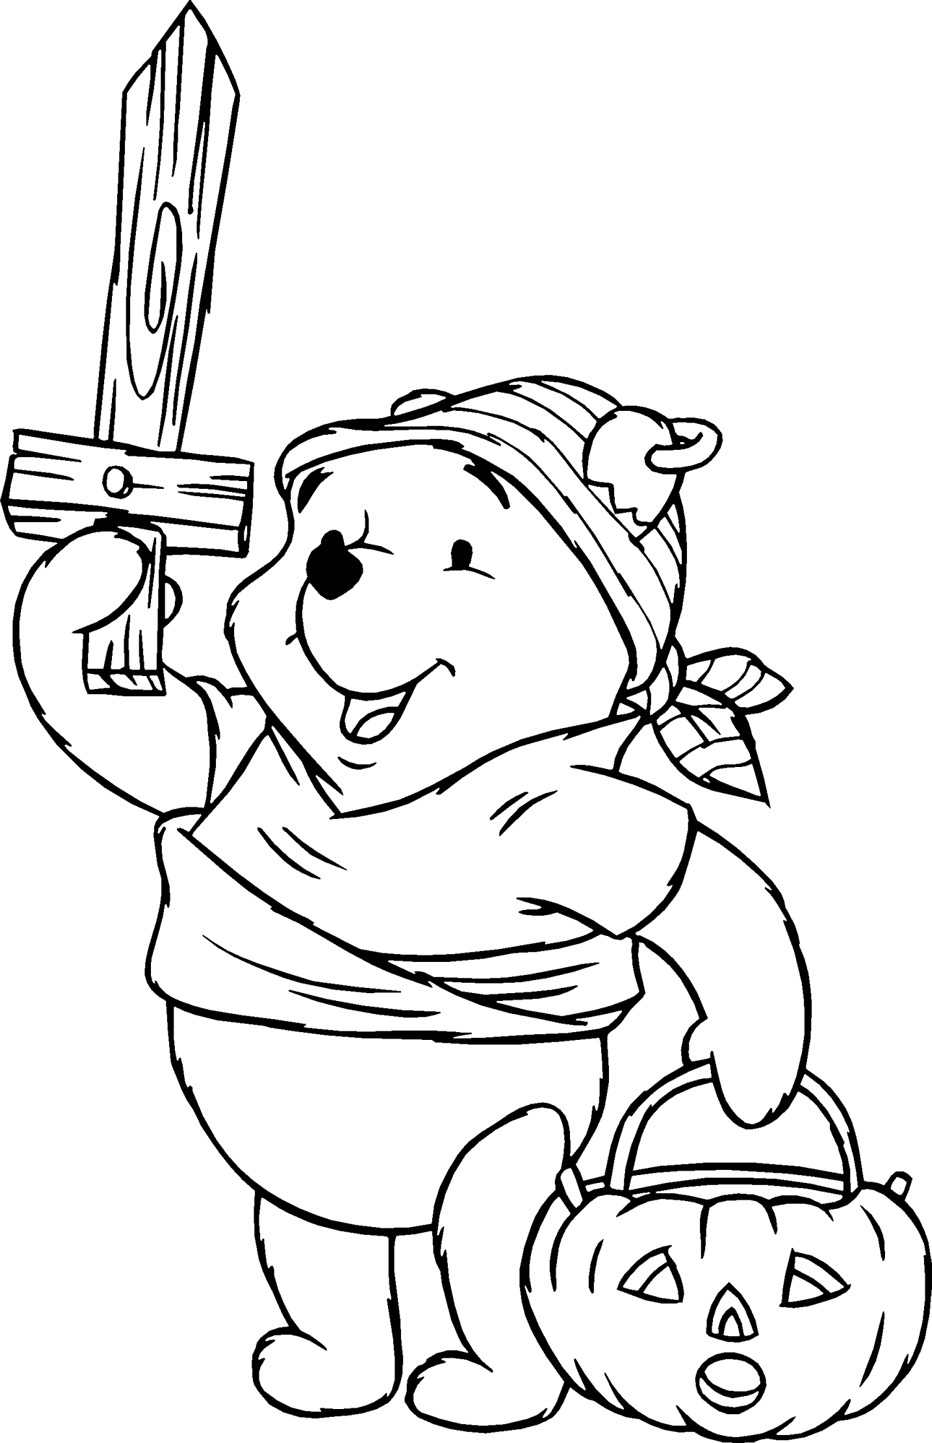 Halloween coloring pages for kids free Printables Disney Winnie the Pooh Pirate